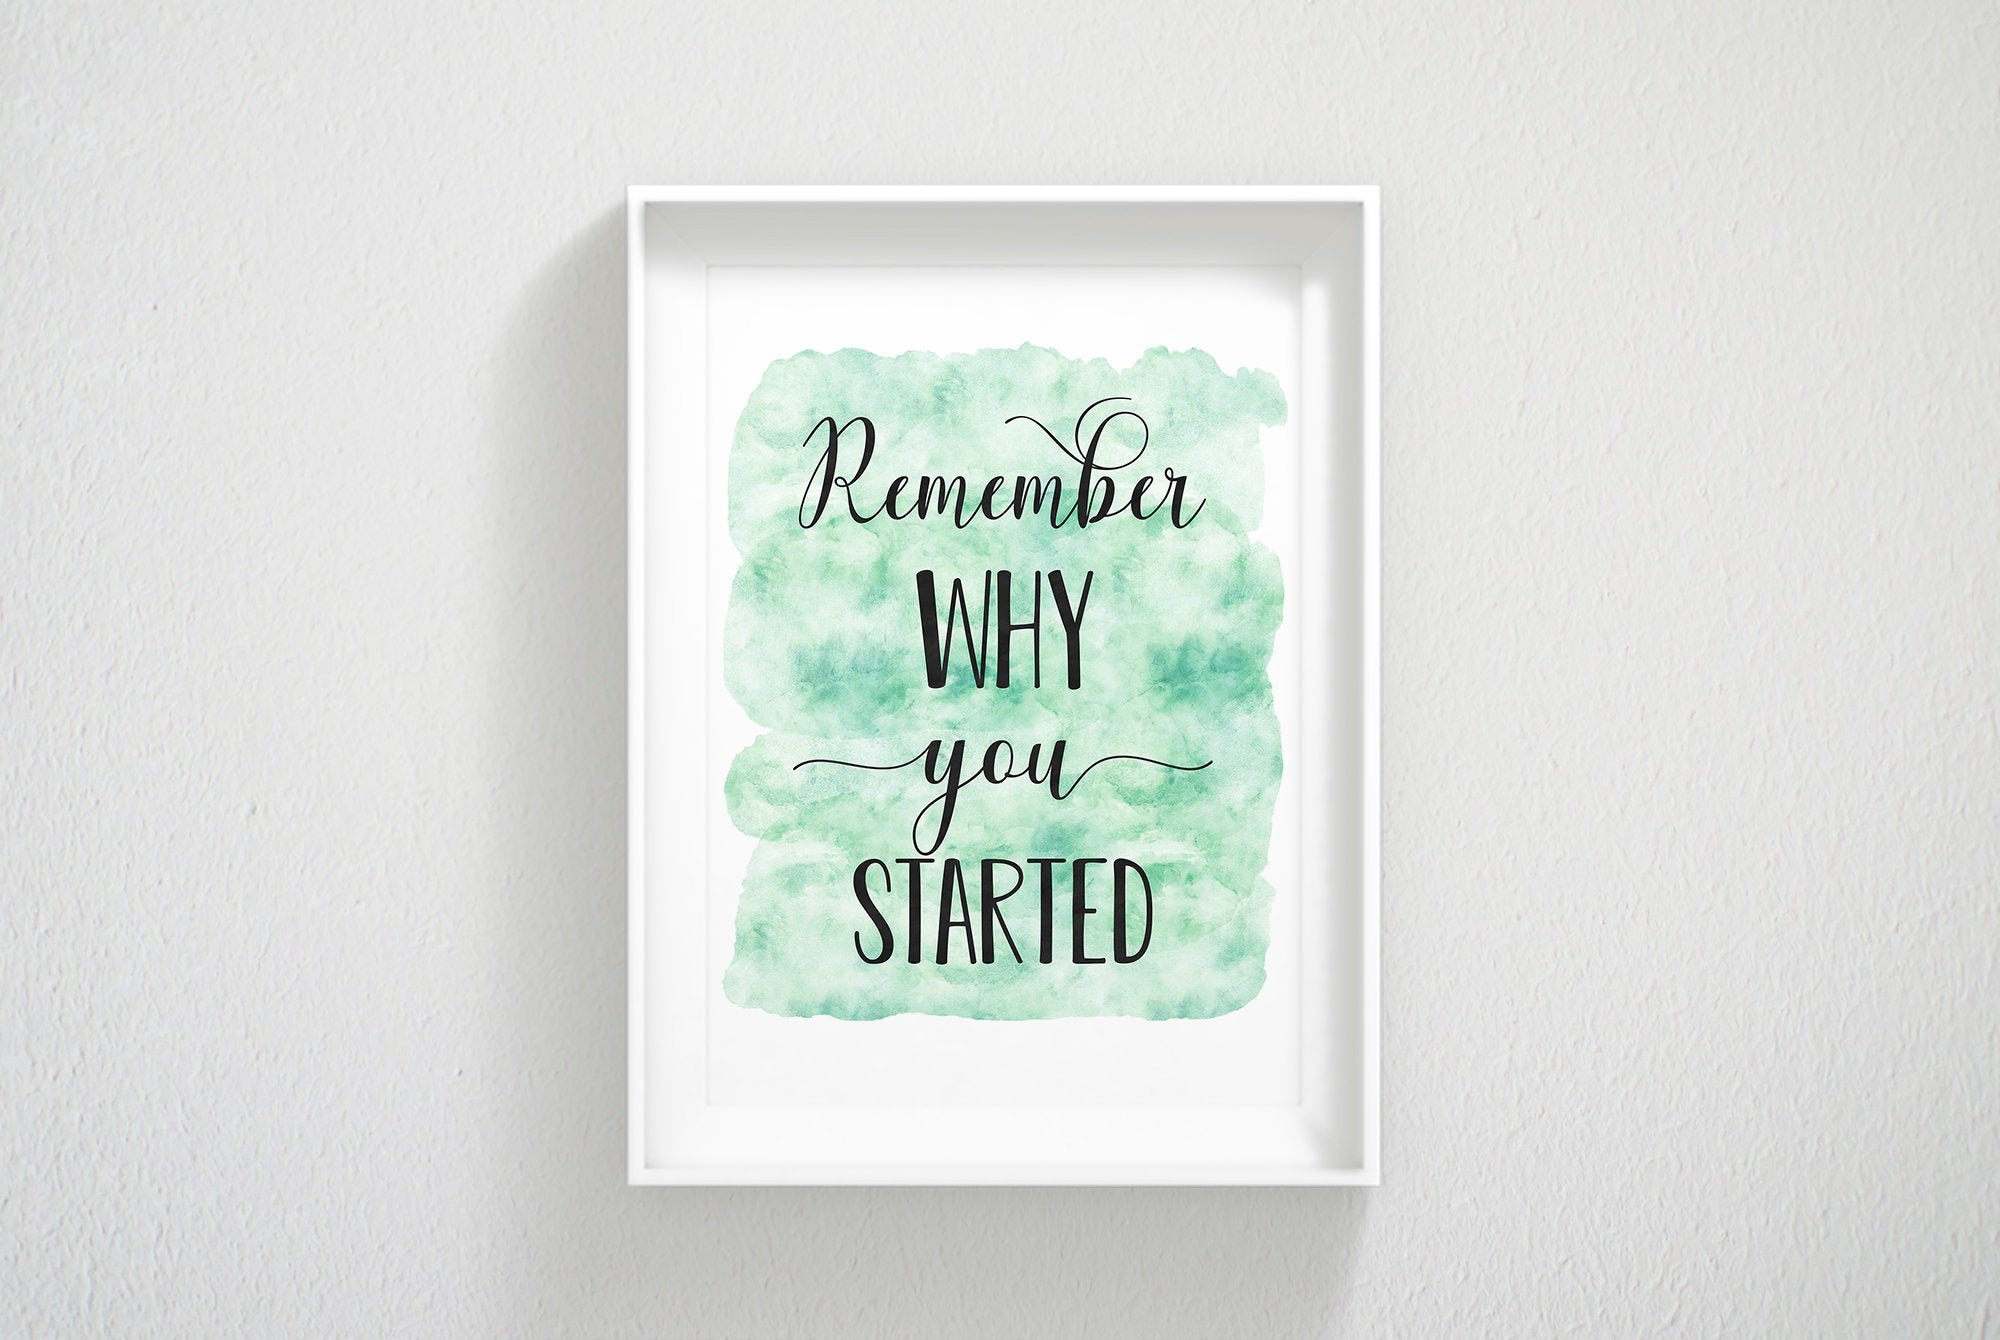 Remember Why You Started, Nursery Print Decor, Inspirational Quotes Wall Art